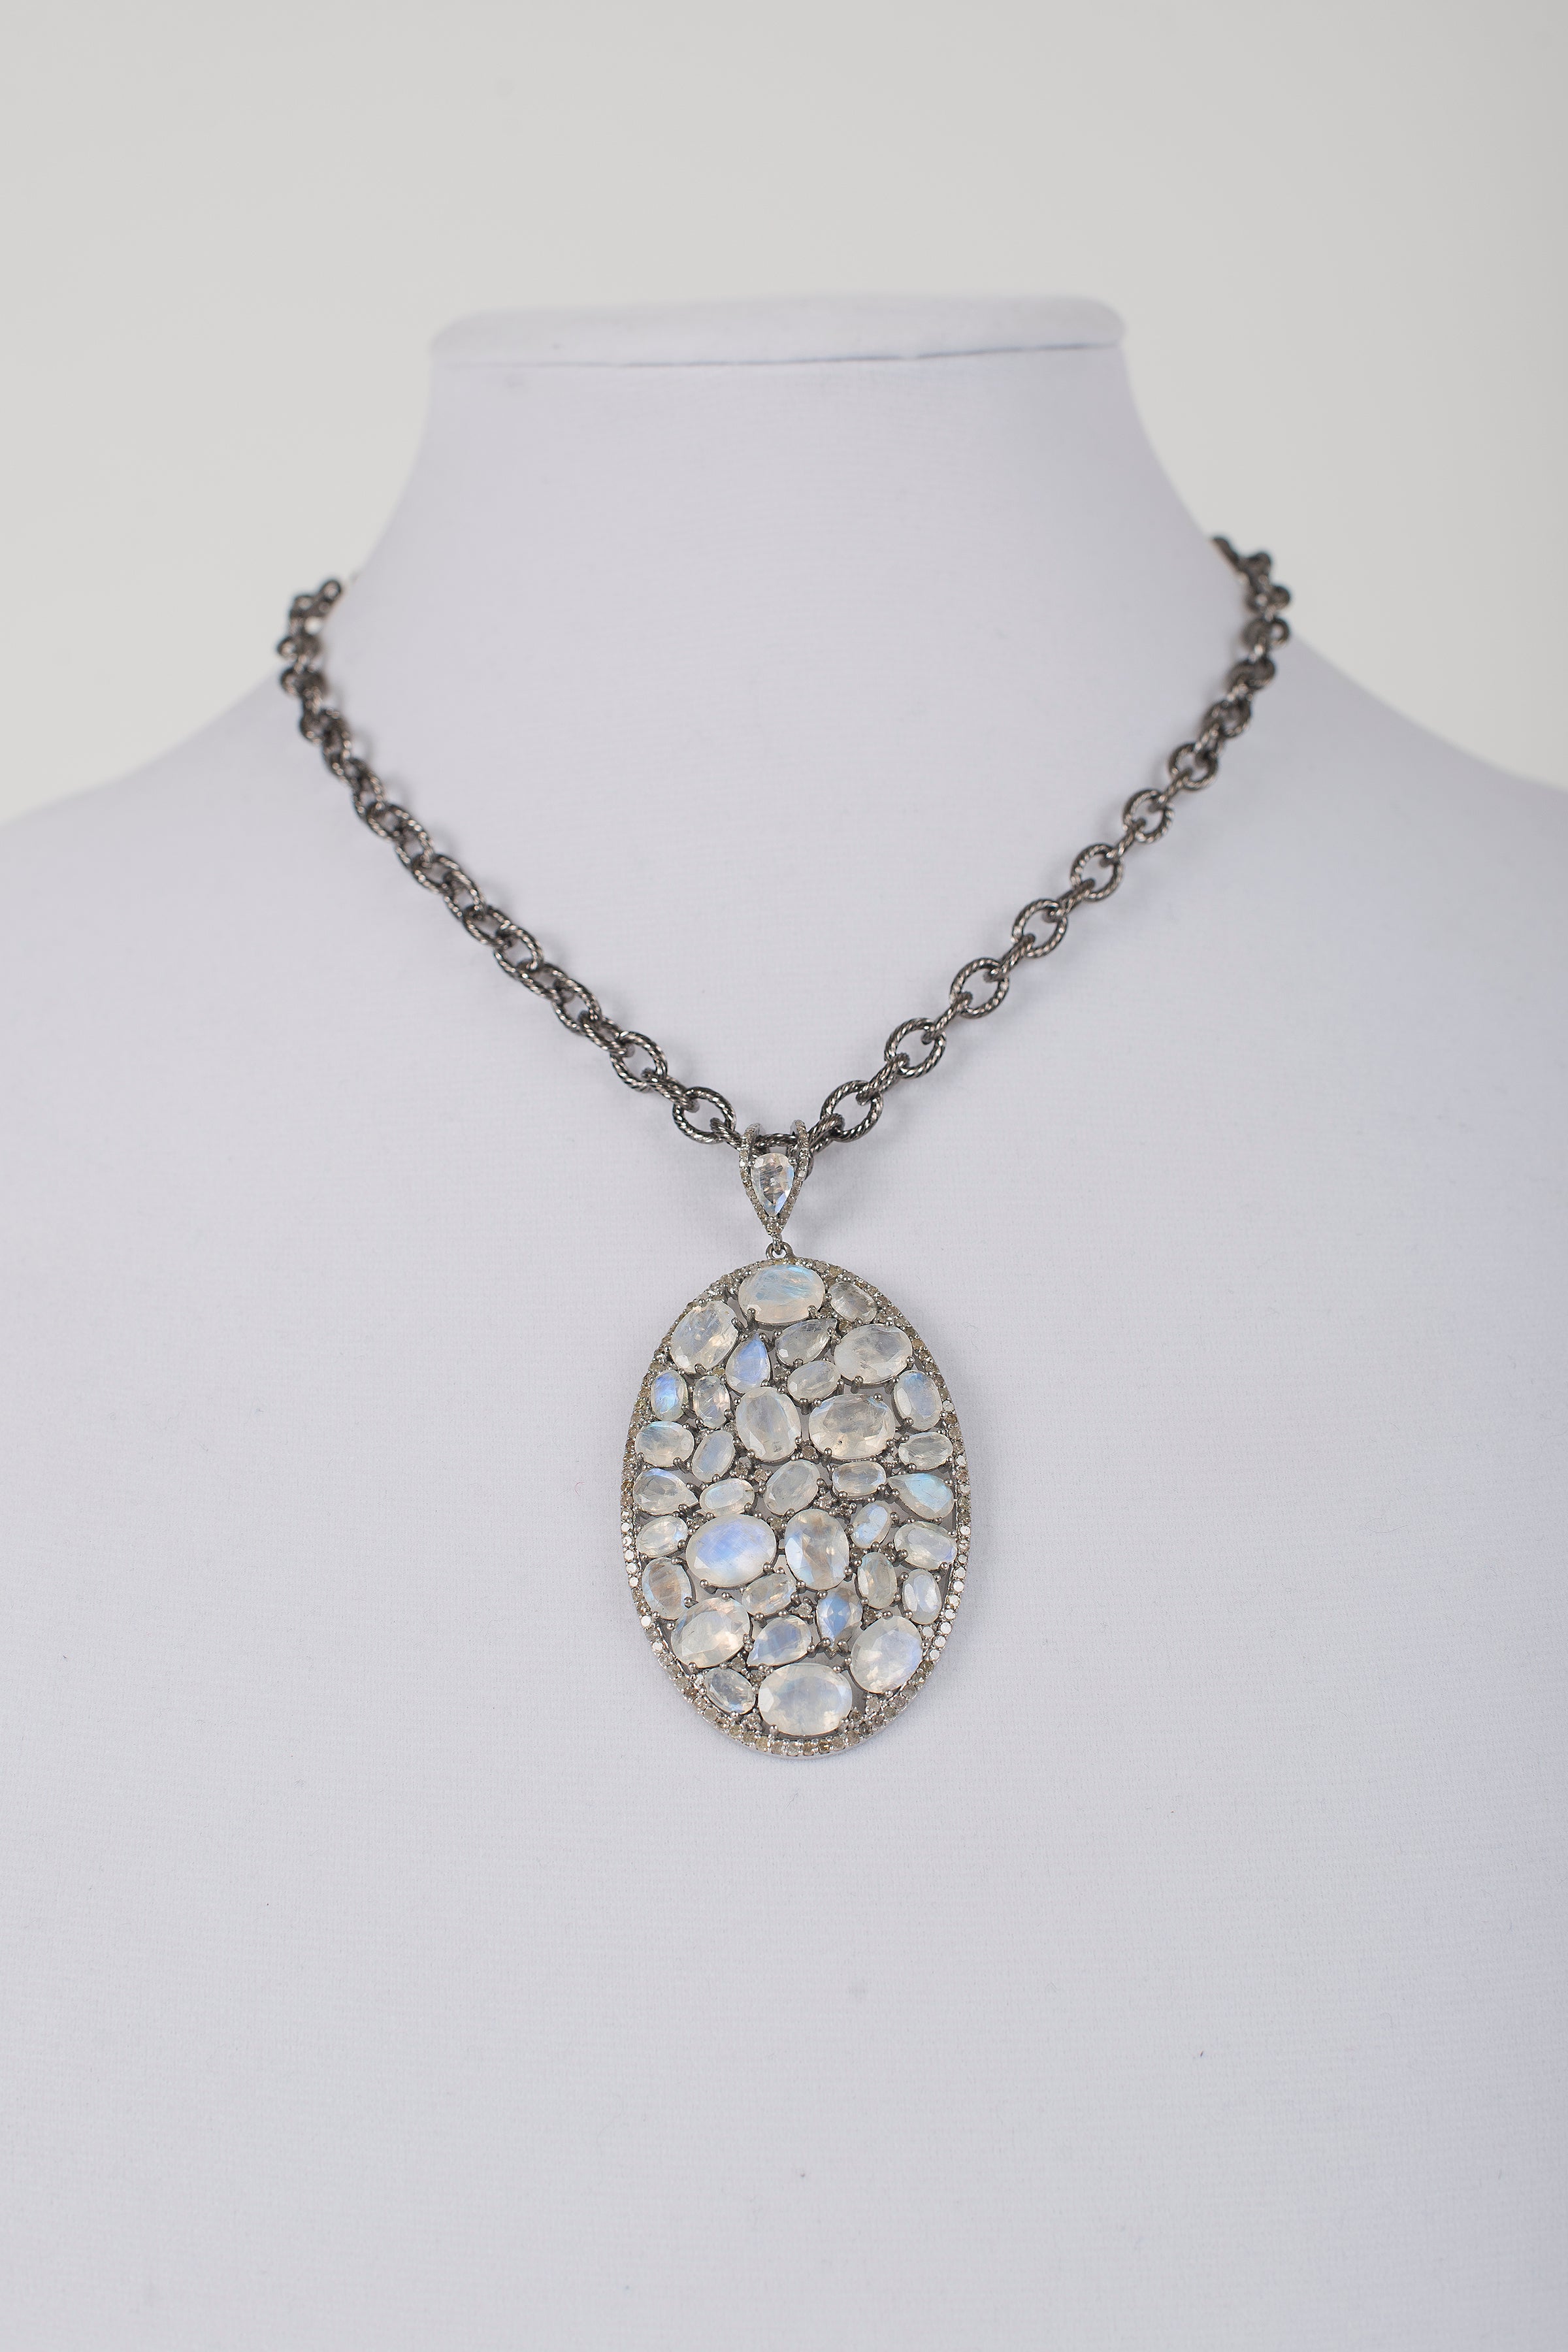 Moonstone and Pave Diamond Pendant on Brushed Metal Chain